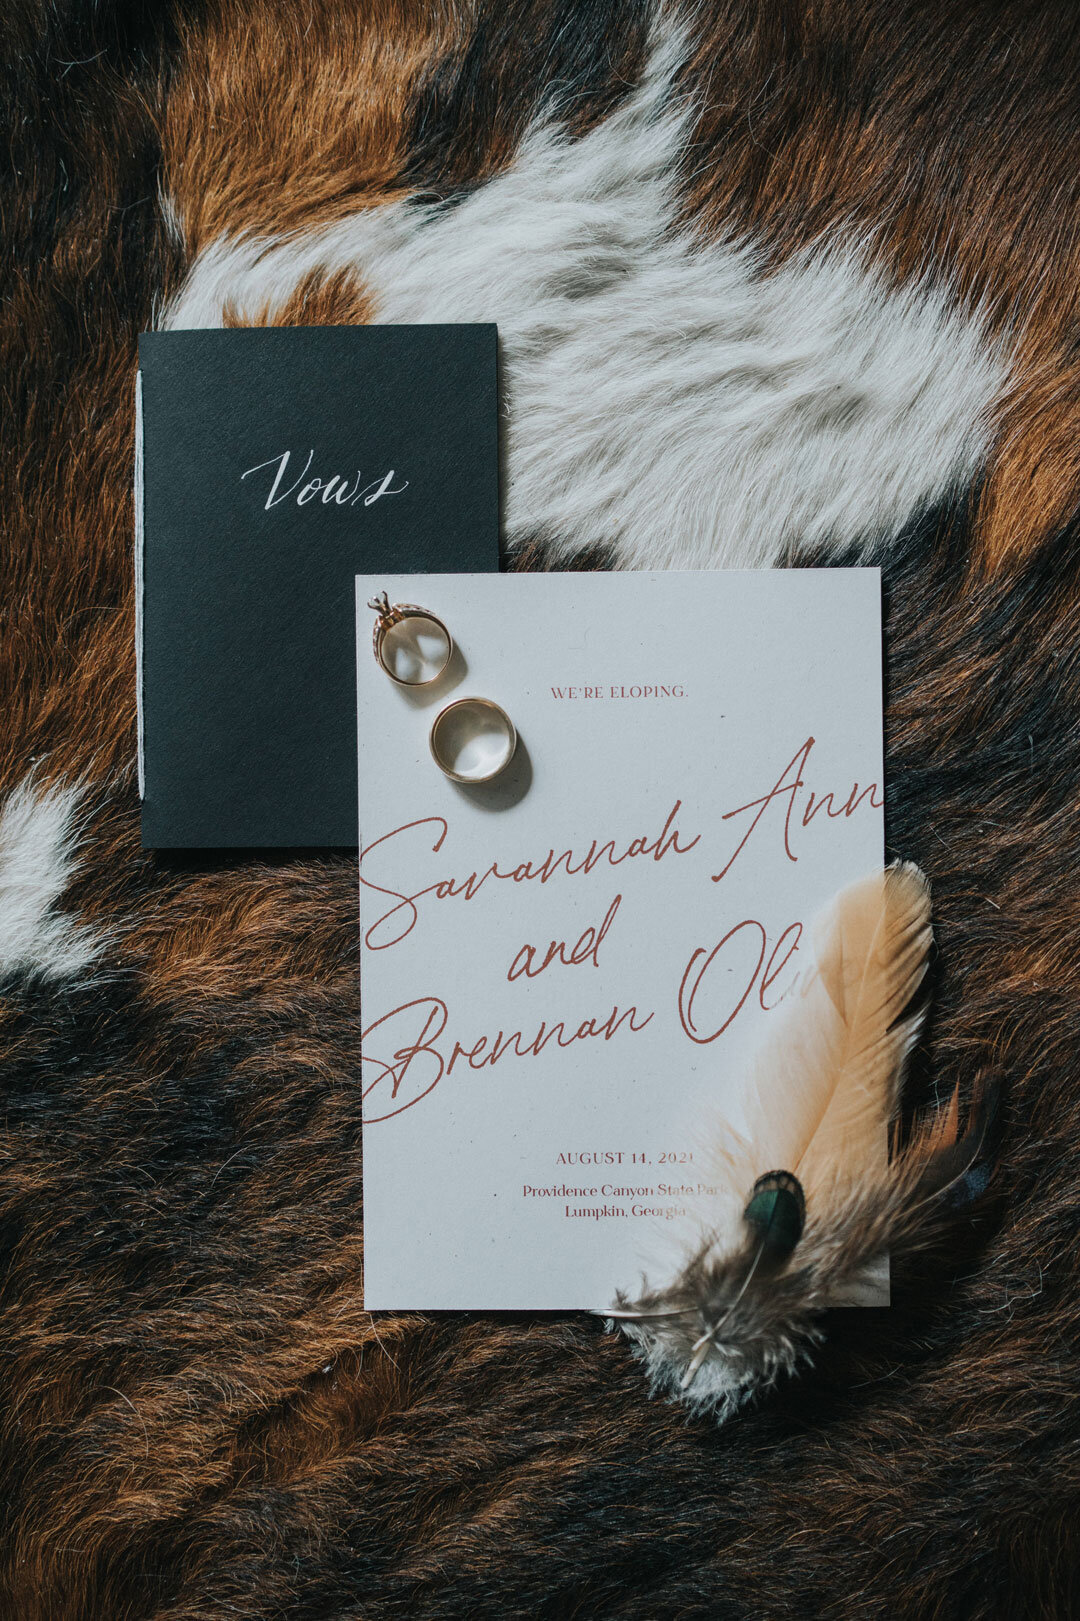 White wedding invitation with red script next to a feather and black vow book